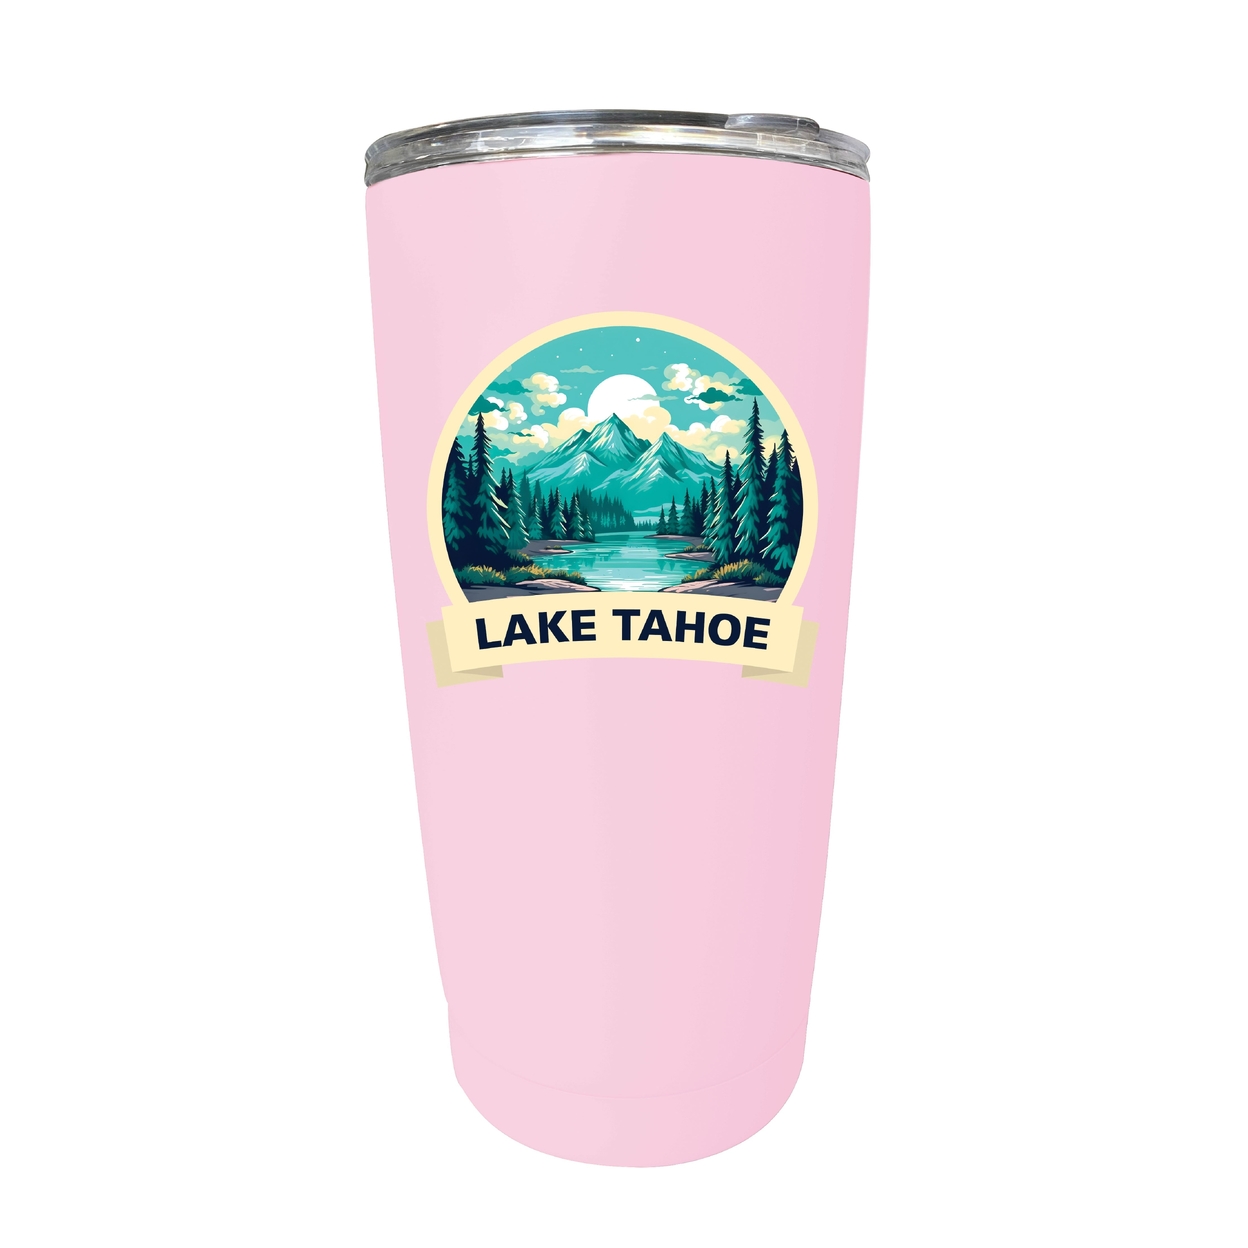 Lake Tahoe California Souvenir 16 Oz Stainless Steel Insulated Tumbler - Pink,,2-Pack